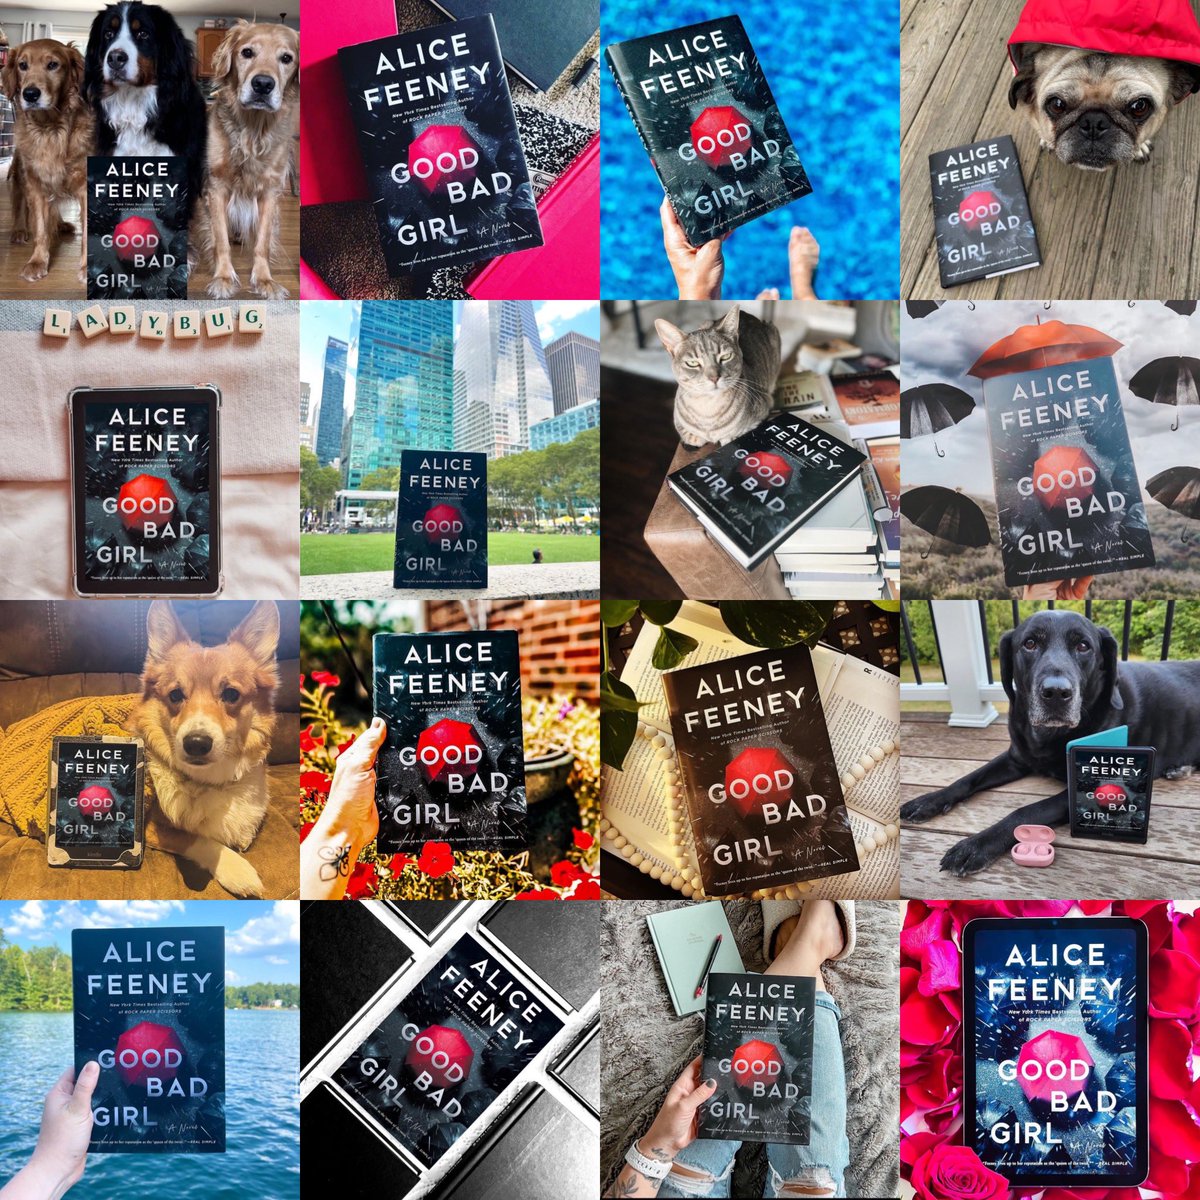 GOOD BAD GIRL has been out in America for five days and I’m so grateful for all your support. Thank you to everyone who has bought the book, written a kind review, or shared a lovely picture. Here are just some of my favourites!